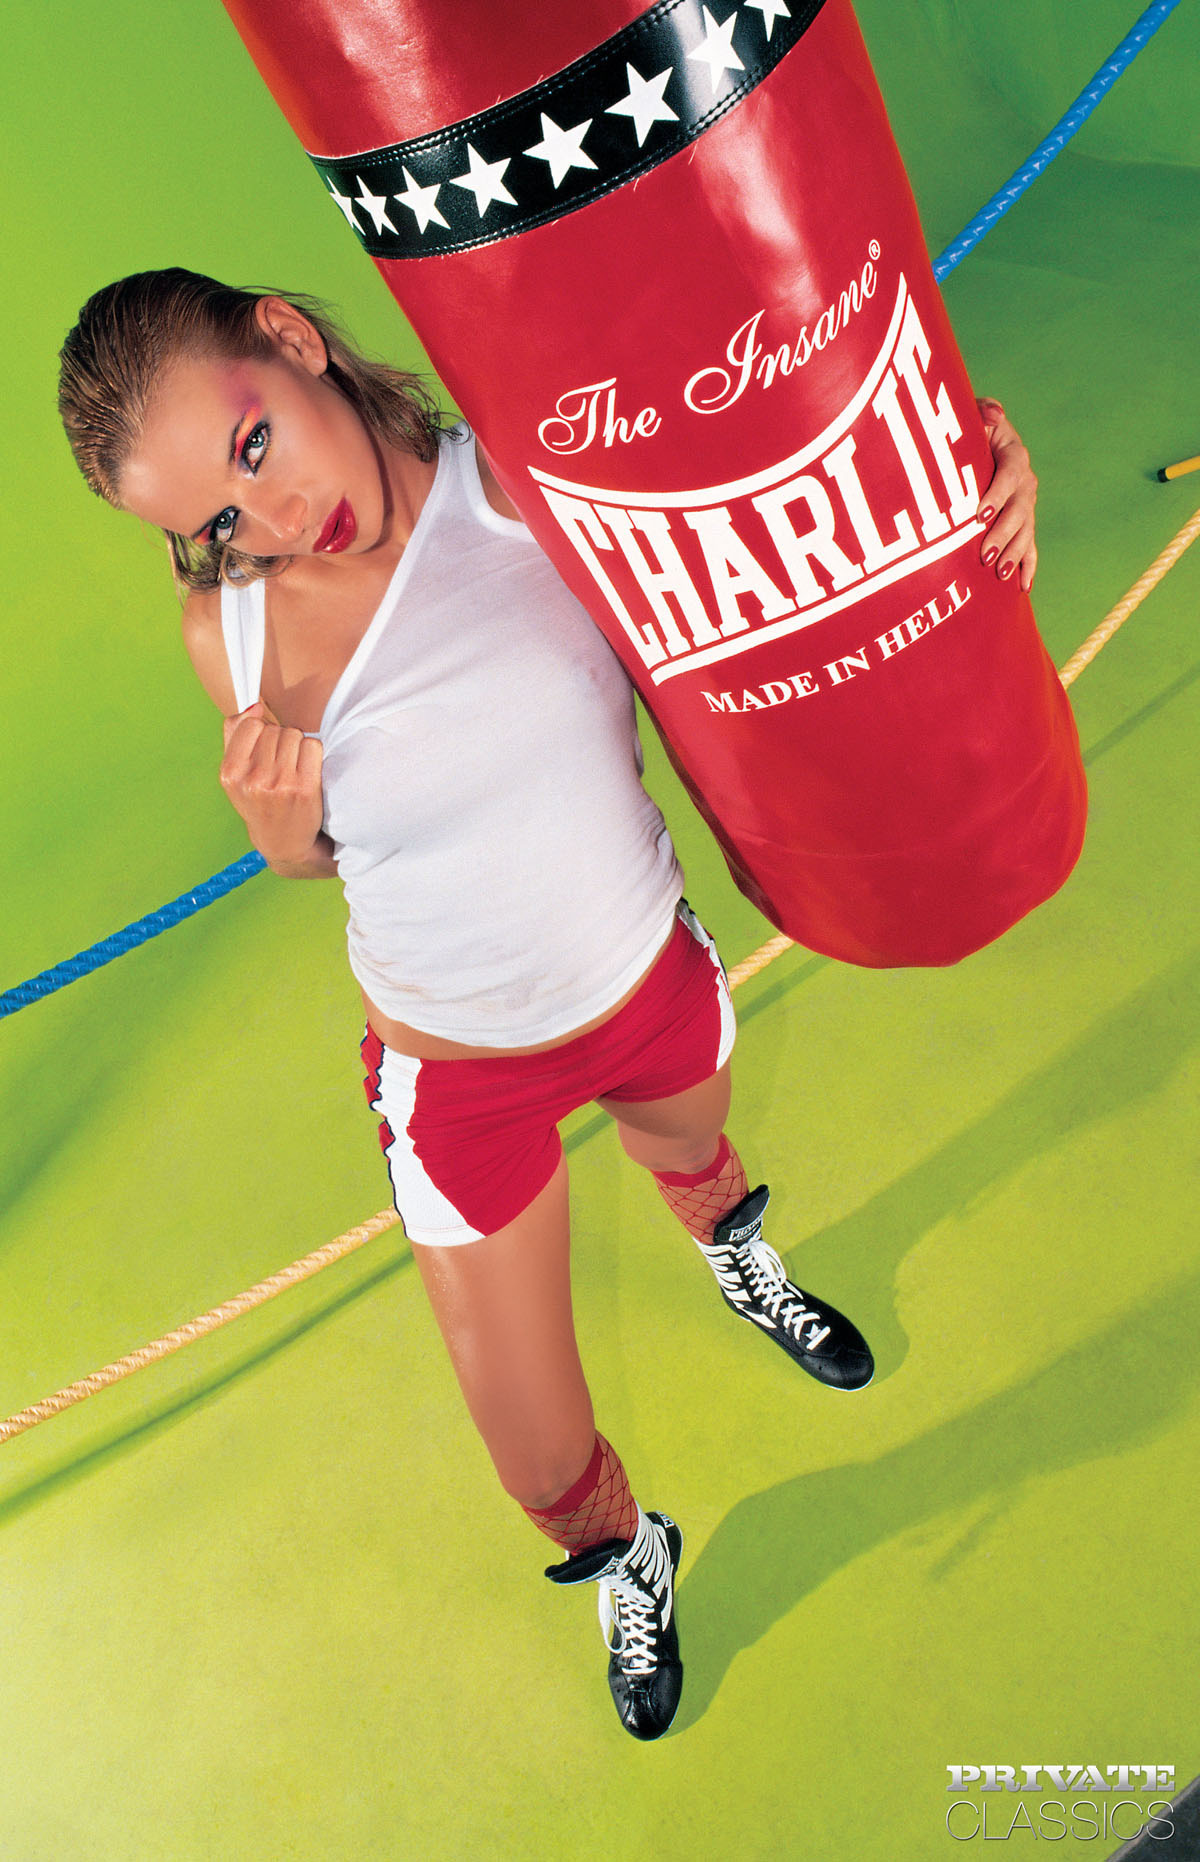 Christie Blanks, The Boxing Girl - picture 00